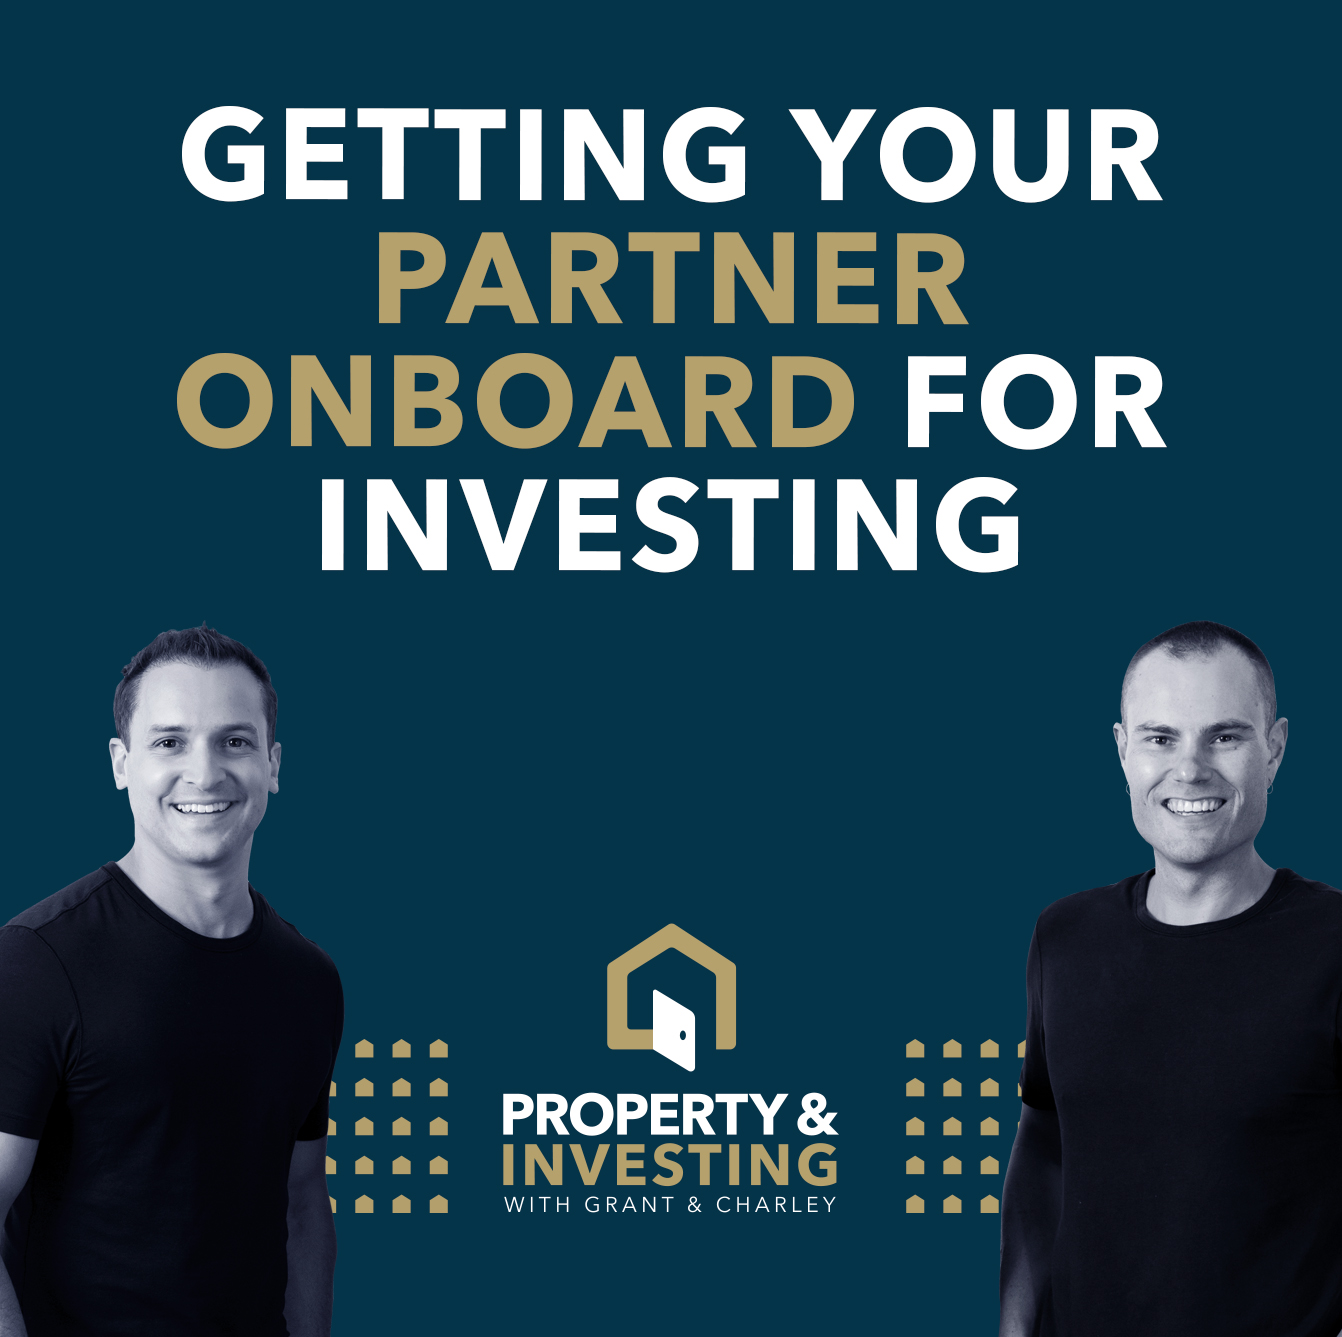 Getting Your Partner Onboard for Property Investing